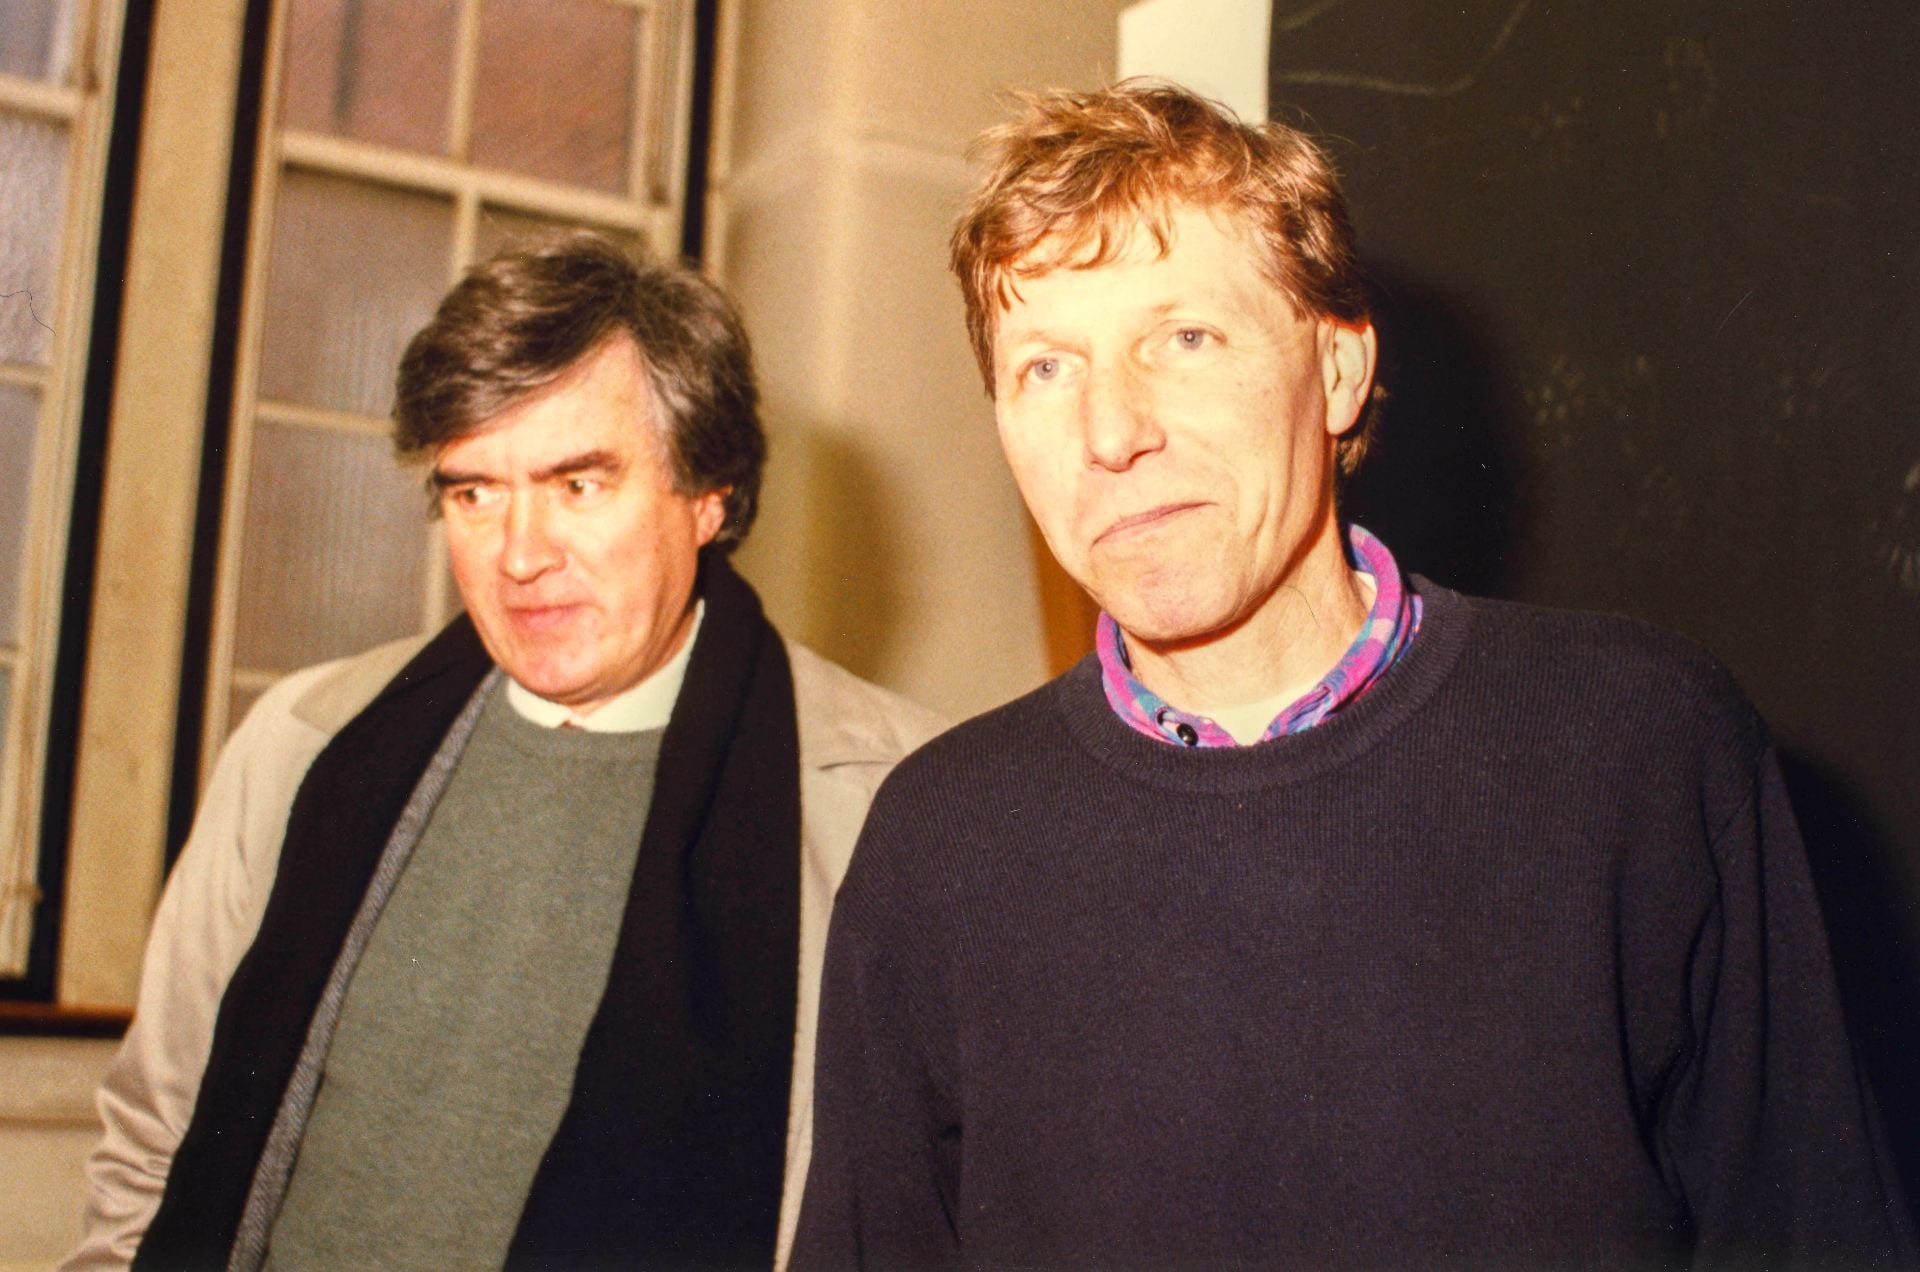 Portrait of Ian Jeffrey and Nigel Perkins together in Goldsmiths College main building studio in 1996. Ian is wearing a black scarf around his shoulders. Nigel is wearing a sweater. 